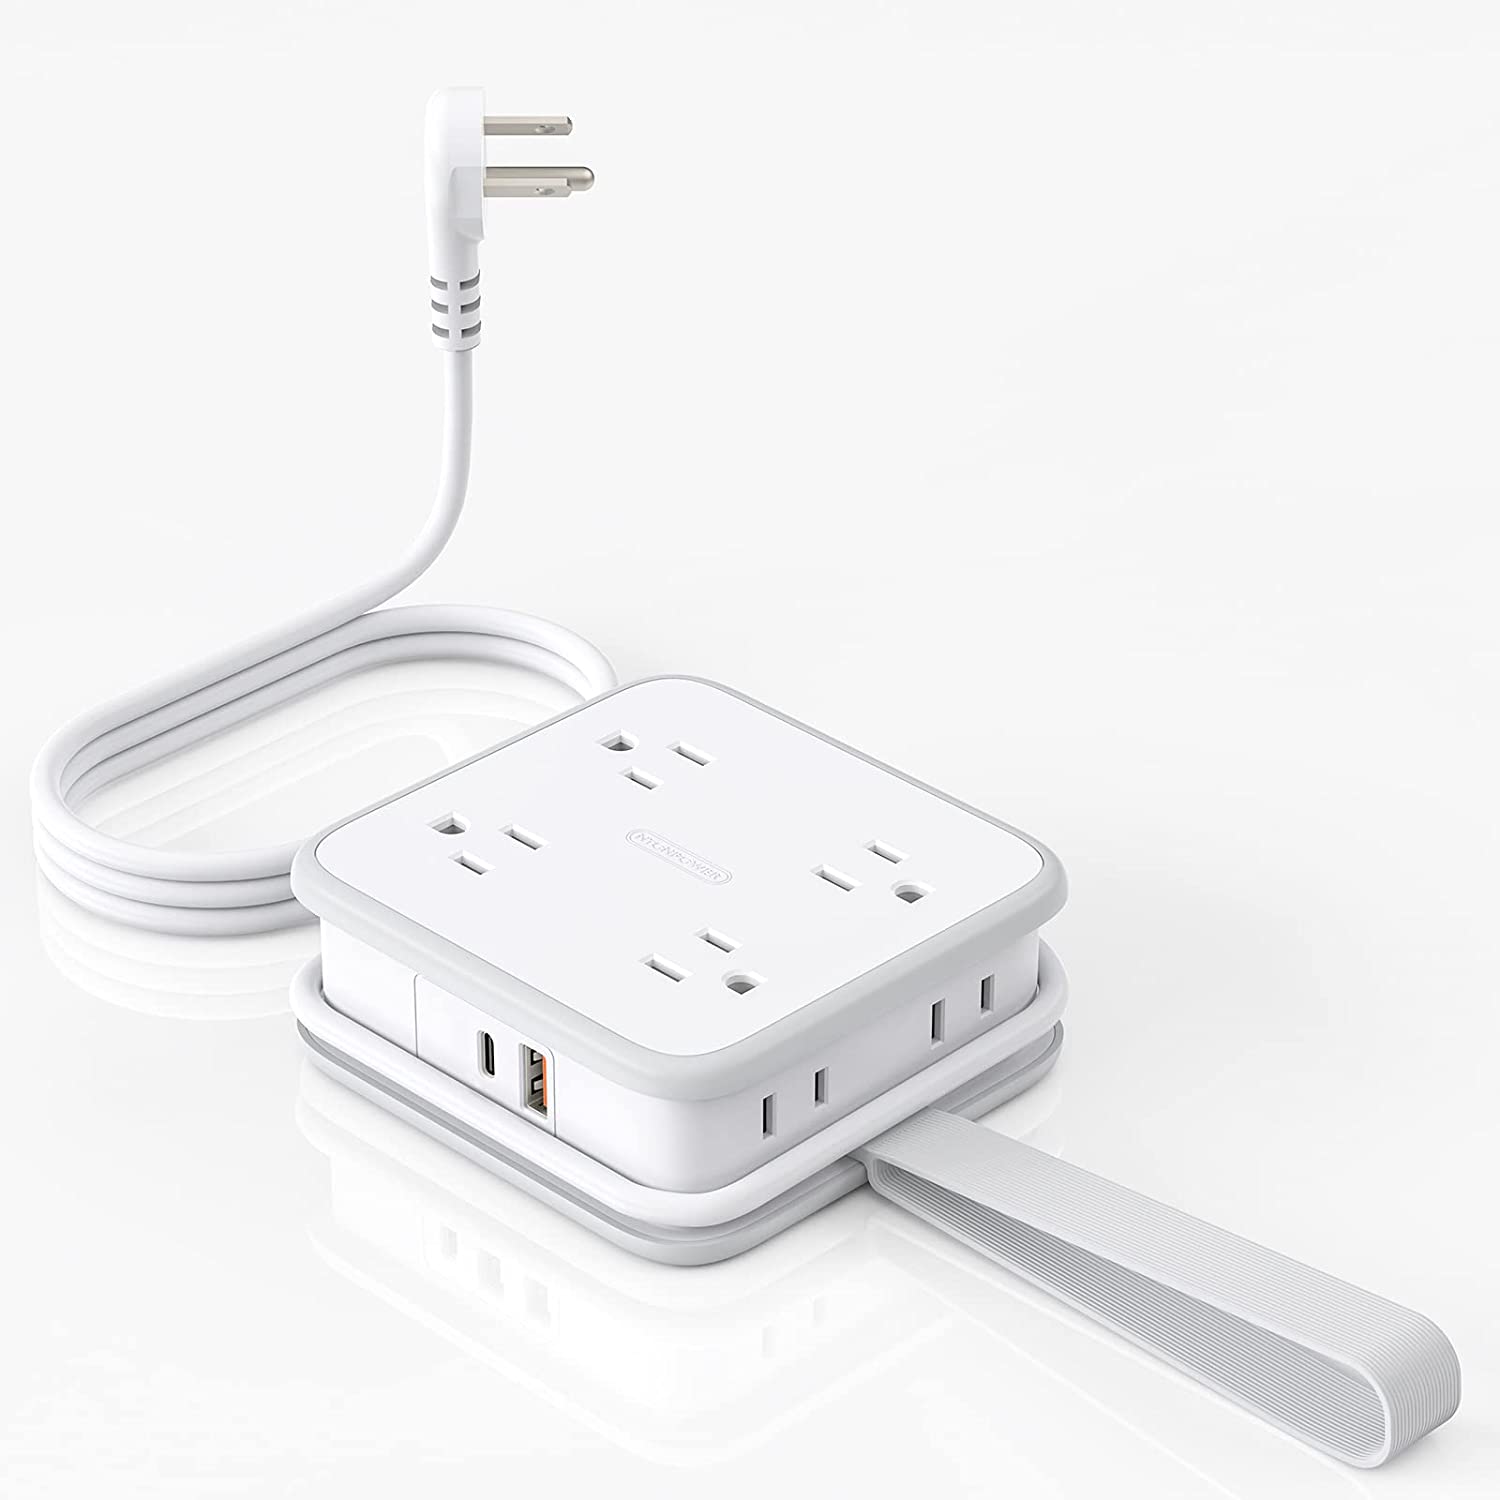 Ntonpower Powercube Power Strip 8 Outlets 3 USB Wrapped Cord